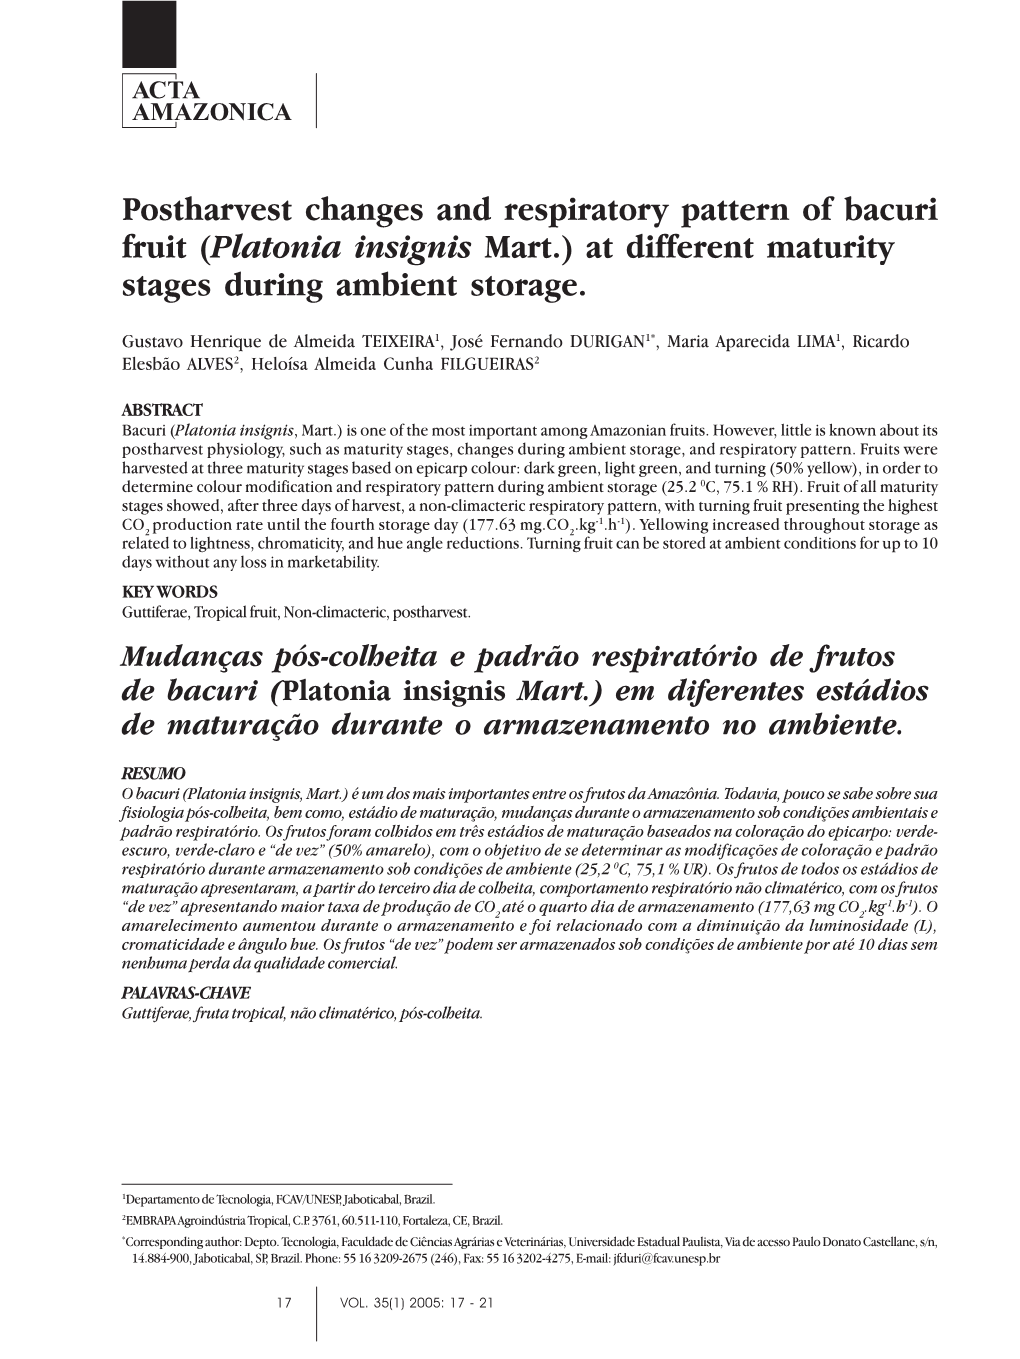 Postharvest Changes and Respiratory Pattern of Bacuri Fruit (Platonia Insignis Mart.) at Different Maturity Stages During Ambient Storage